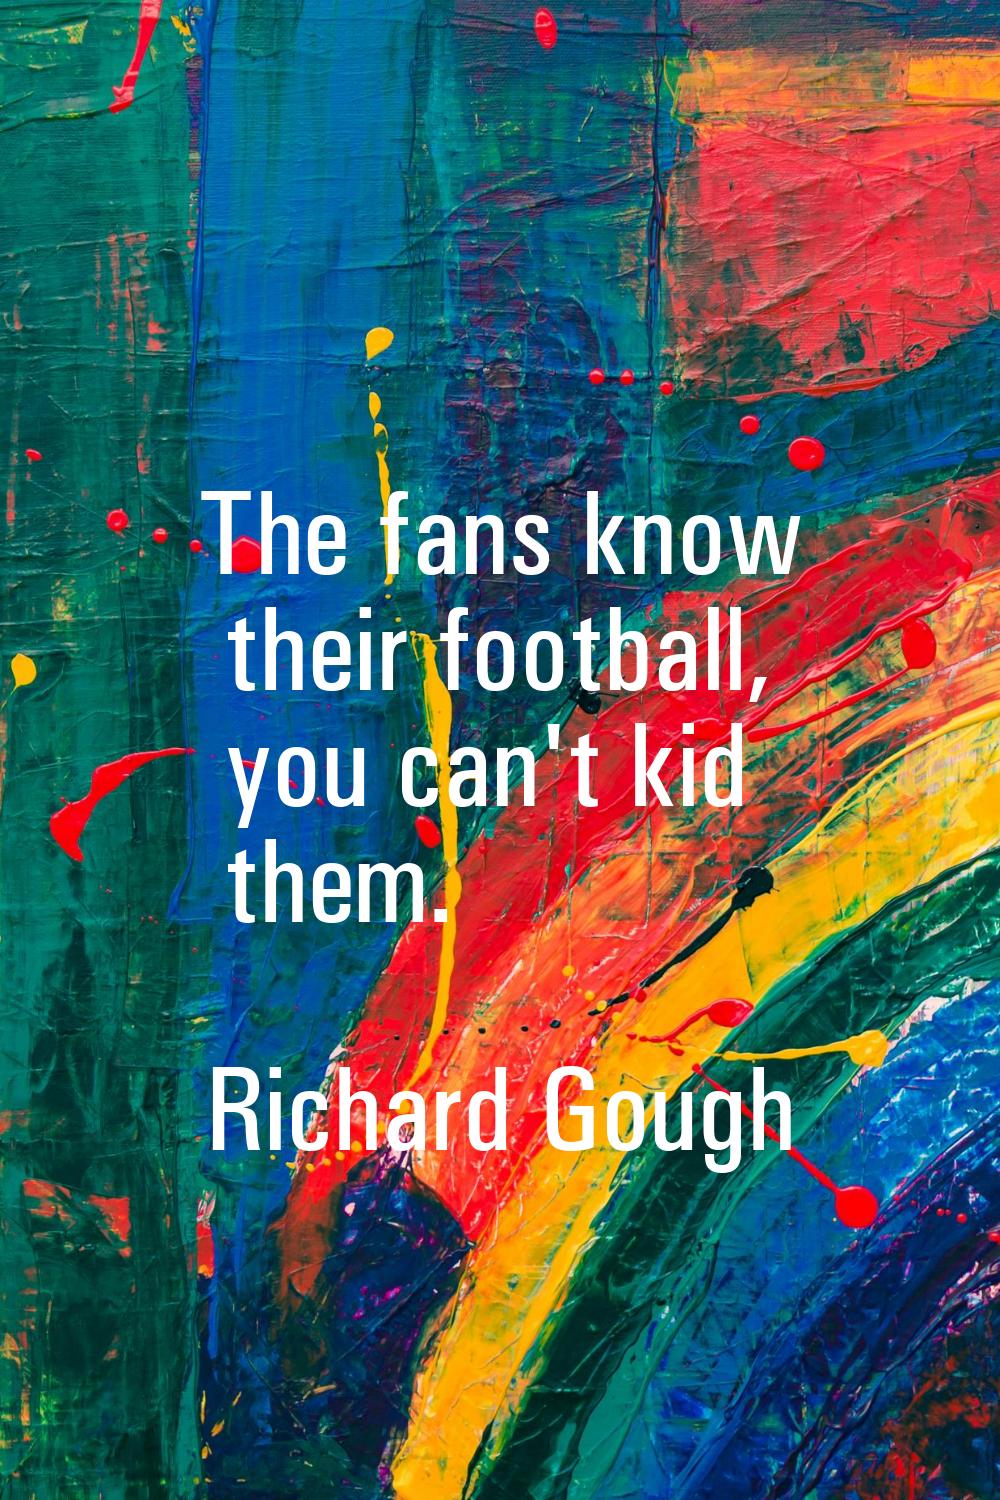 The fans know their football, you can't kid them.